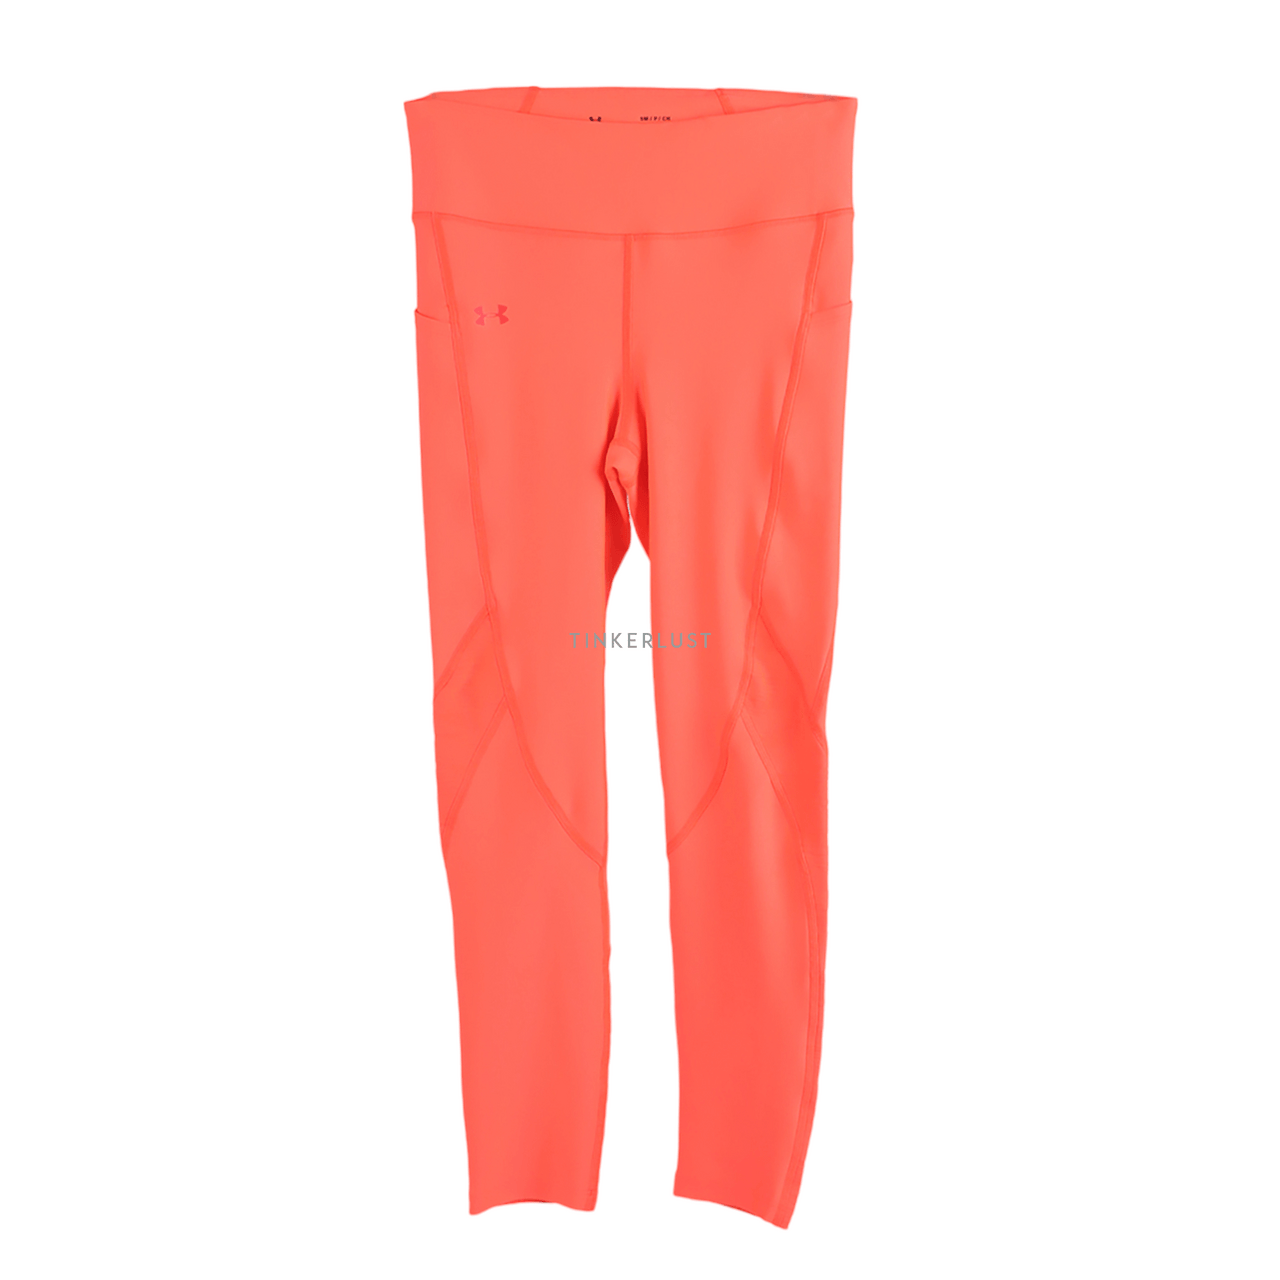 Under Armour Coral Neon Pants